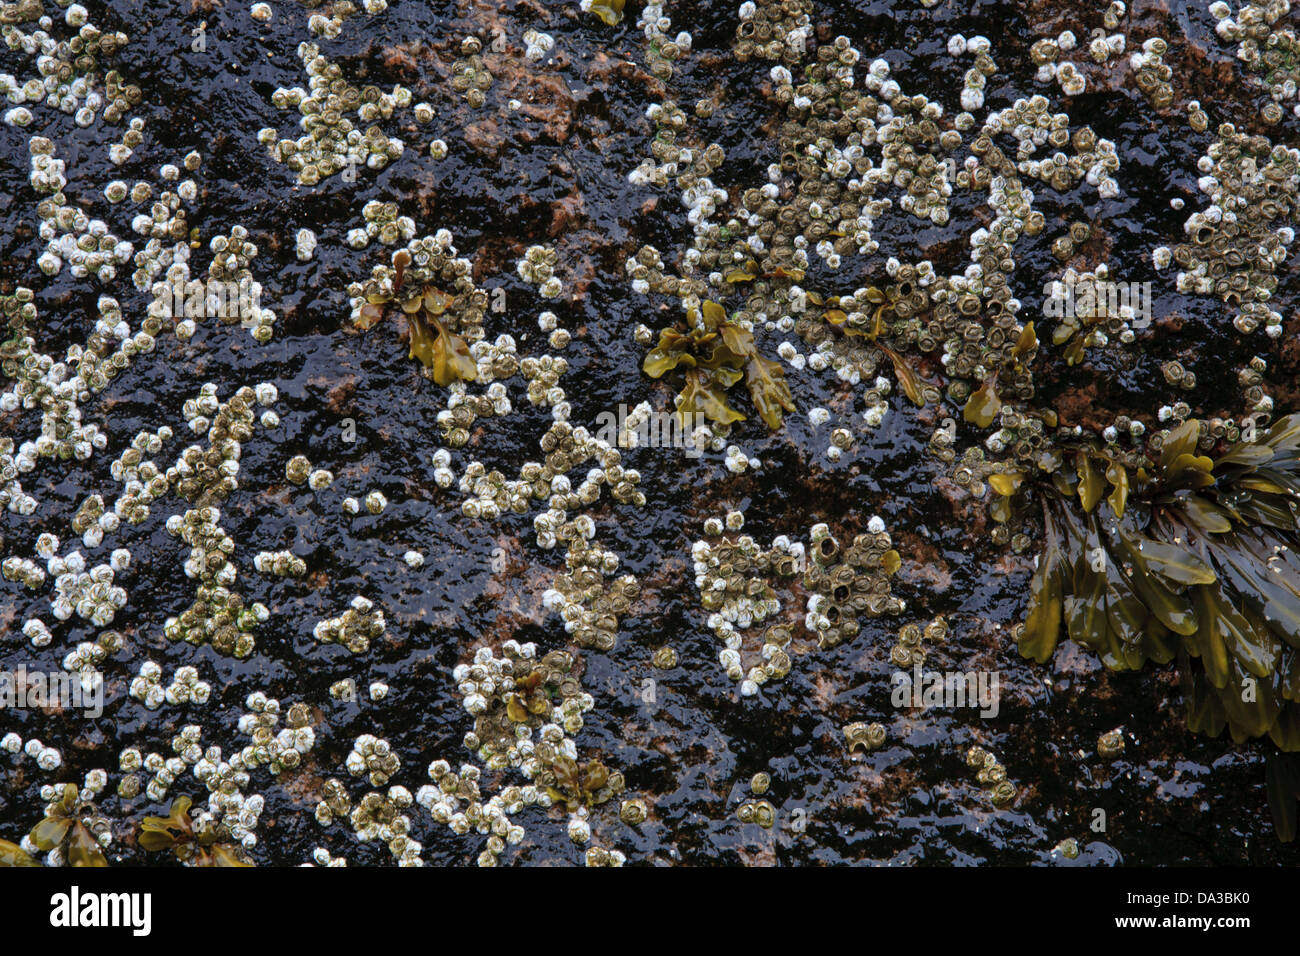 Wet rock with barnacles. Stock Photo